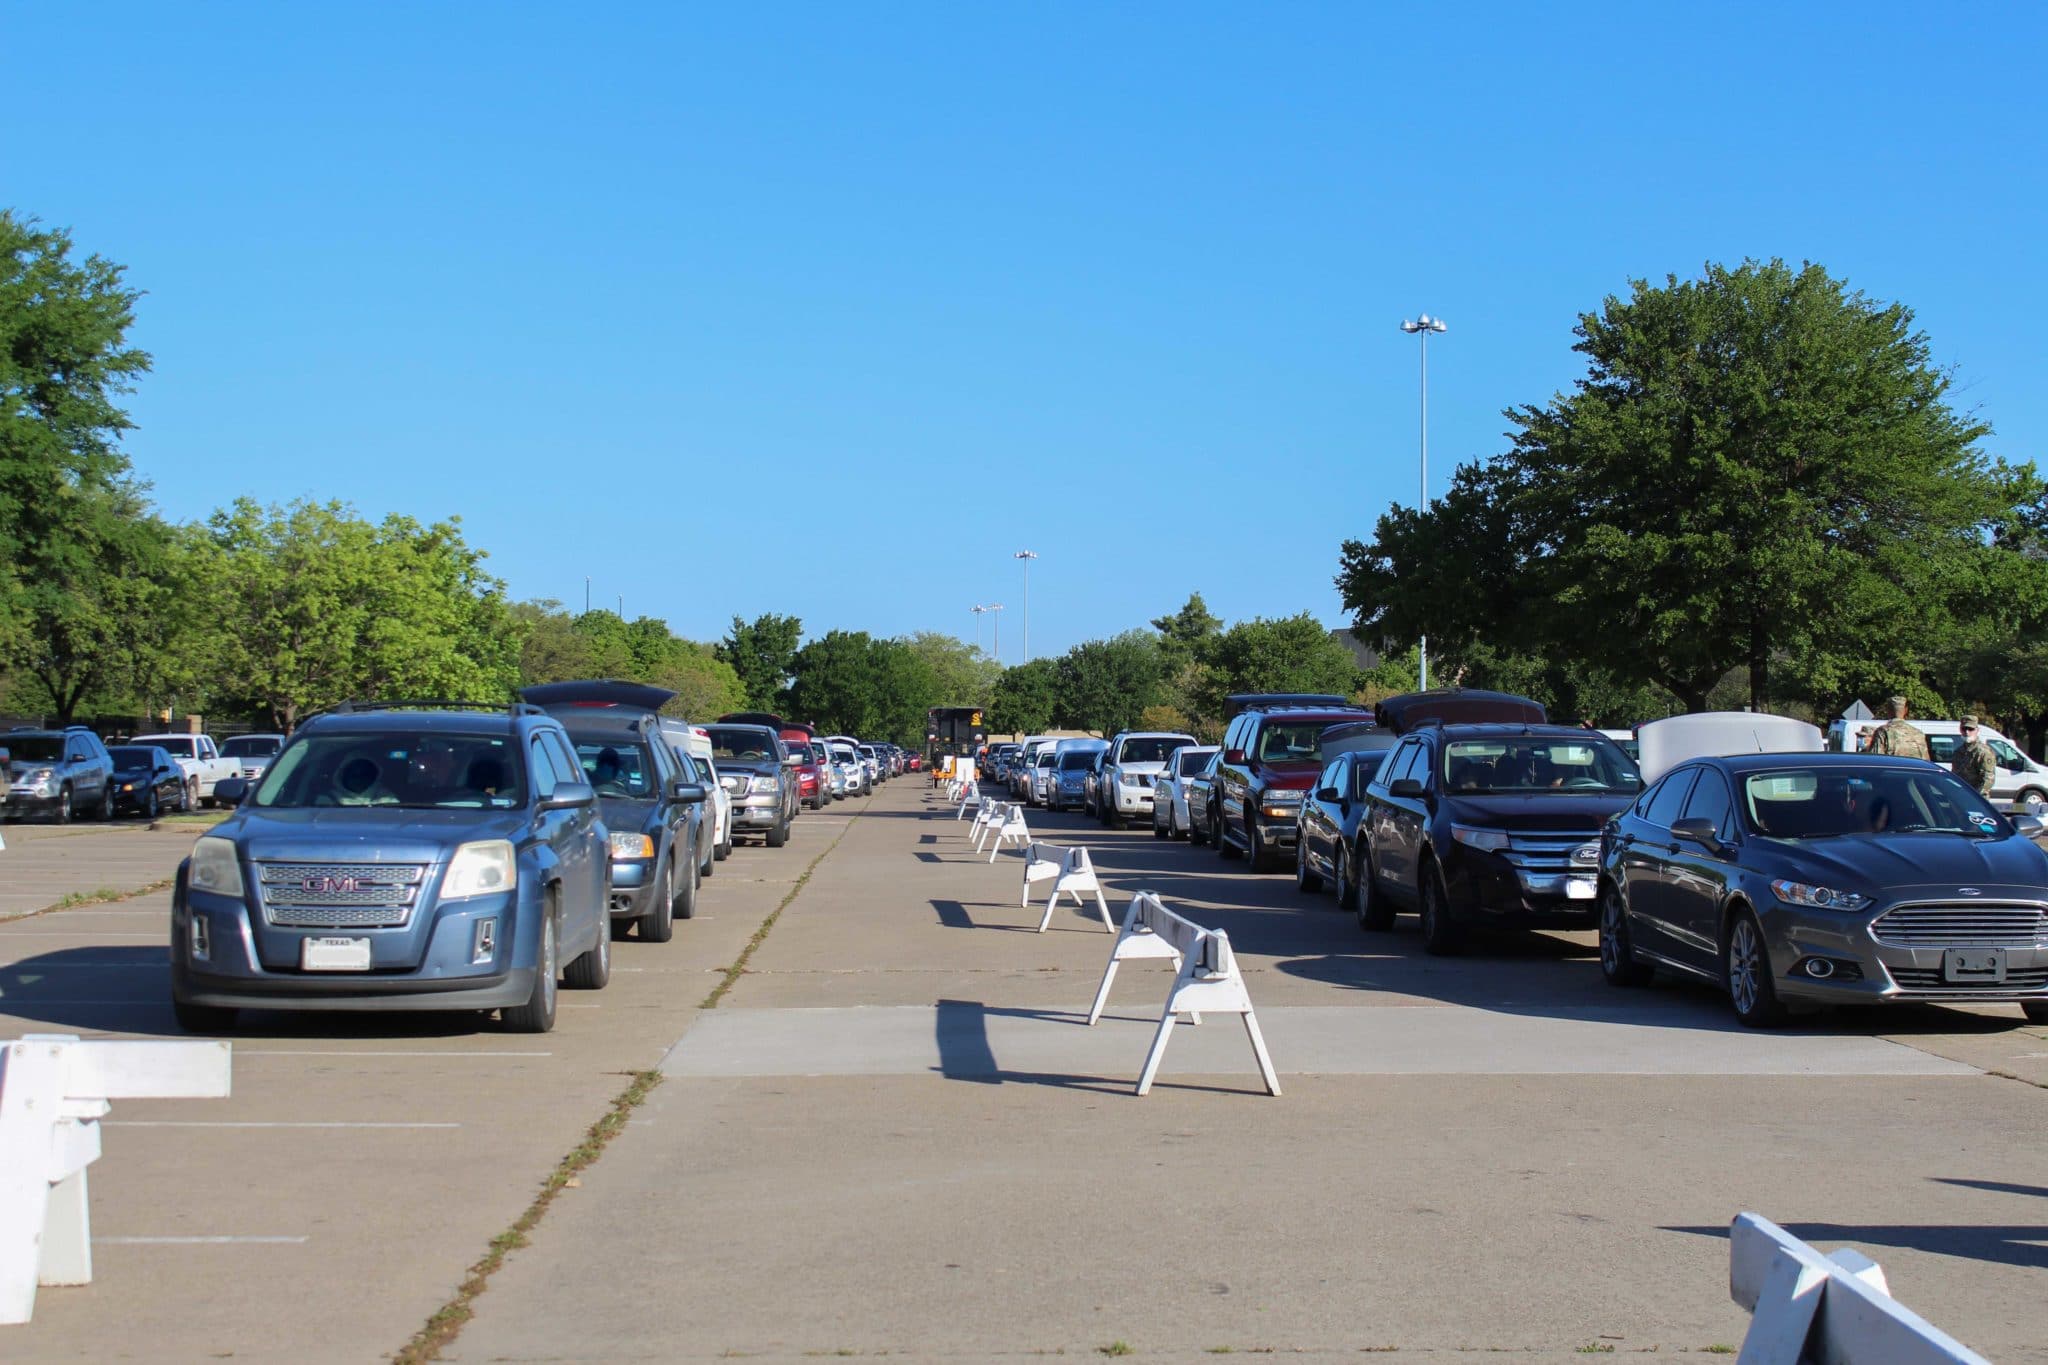 Cars lined up at Fair Park to recieve food from a North Texas Food Bank Mobile Pantry distribution